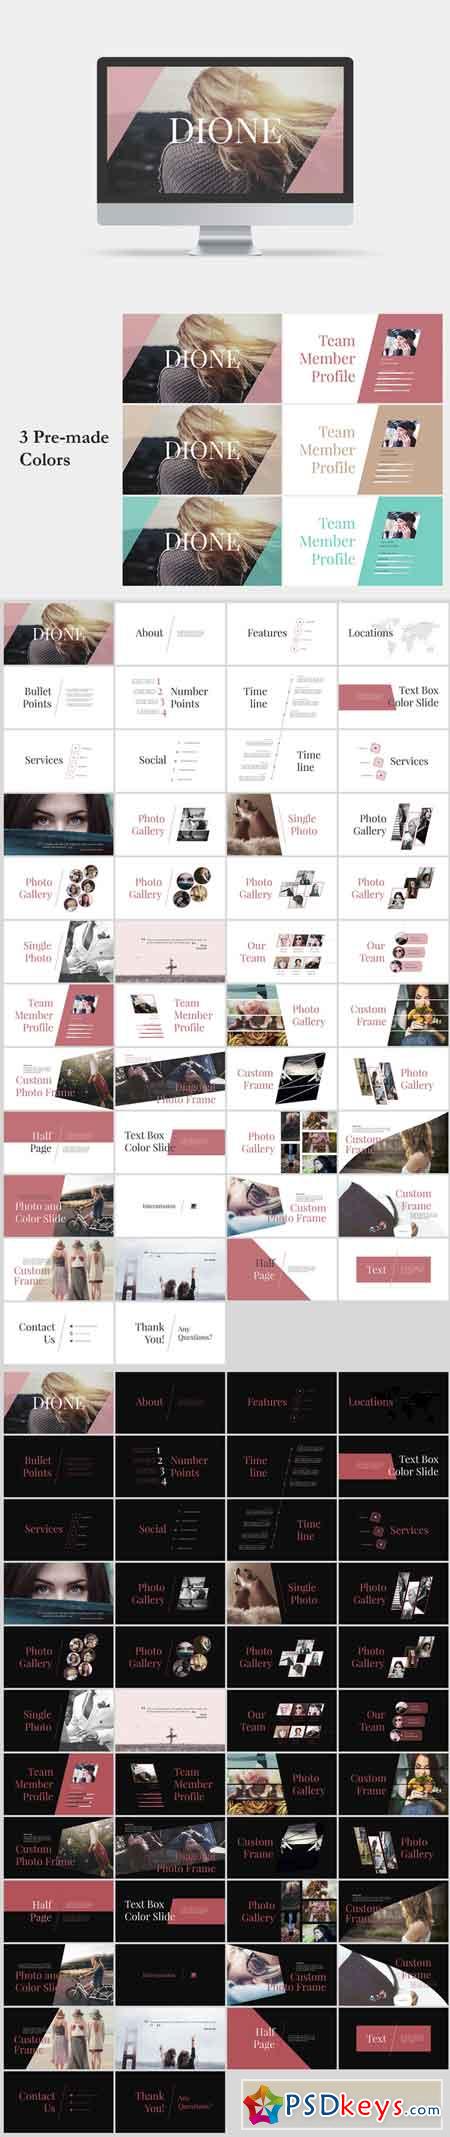 Dione PowerPoint Template 682416